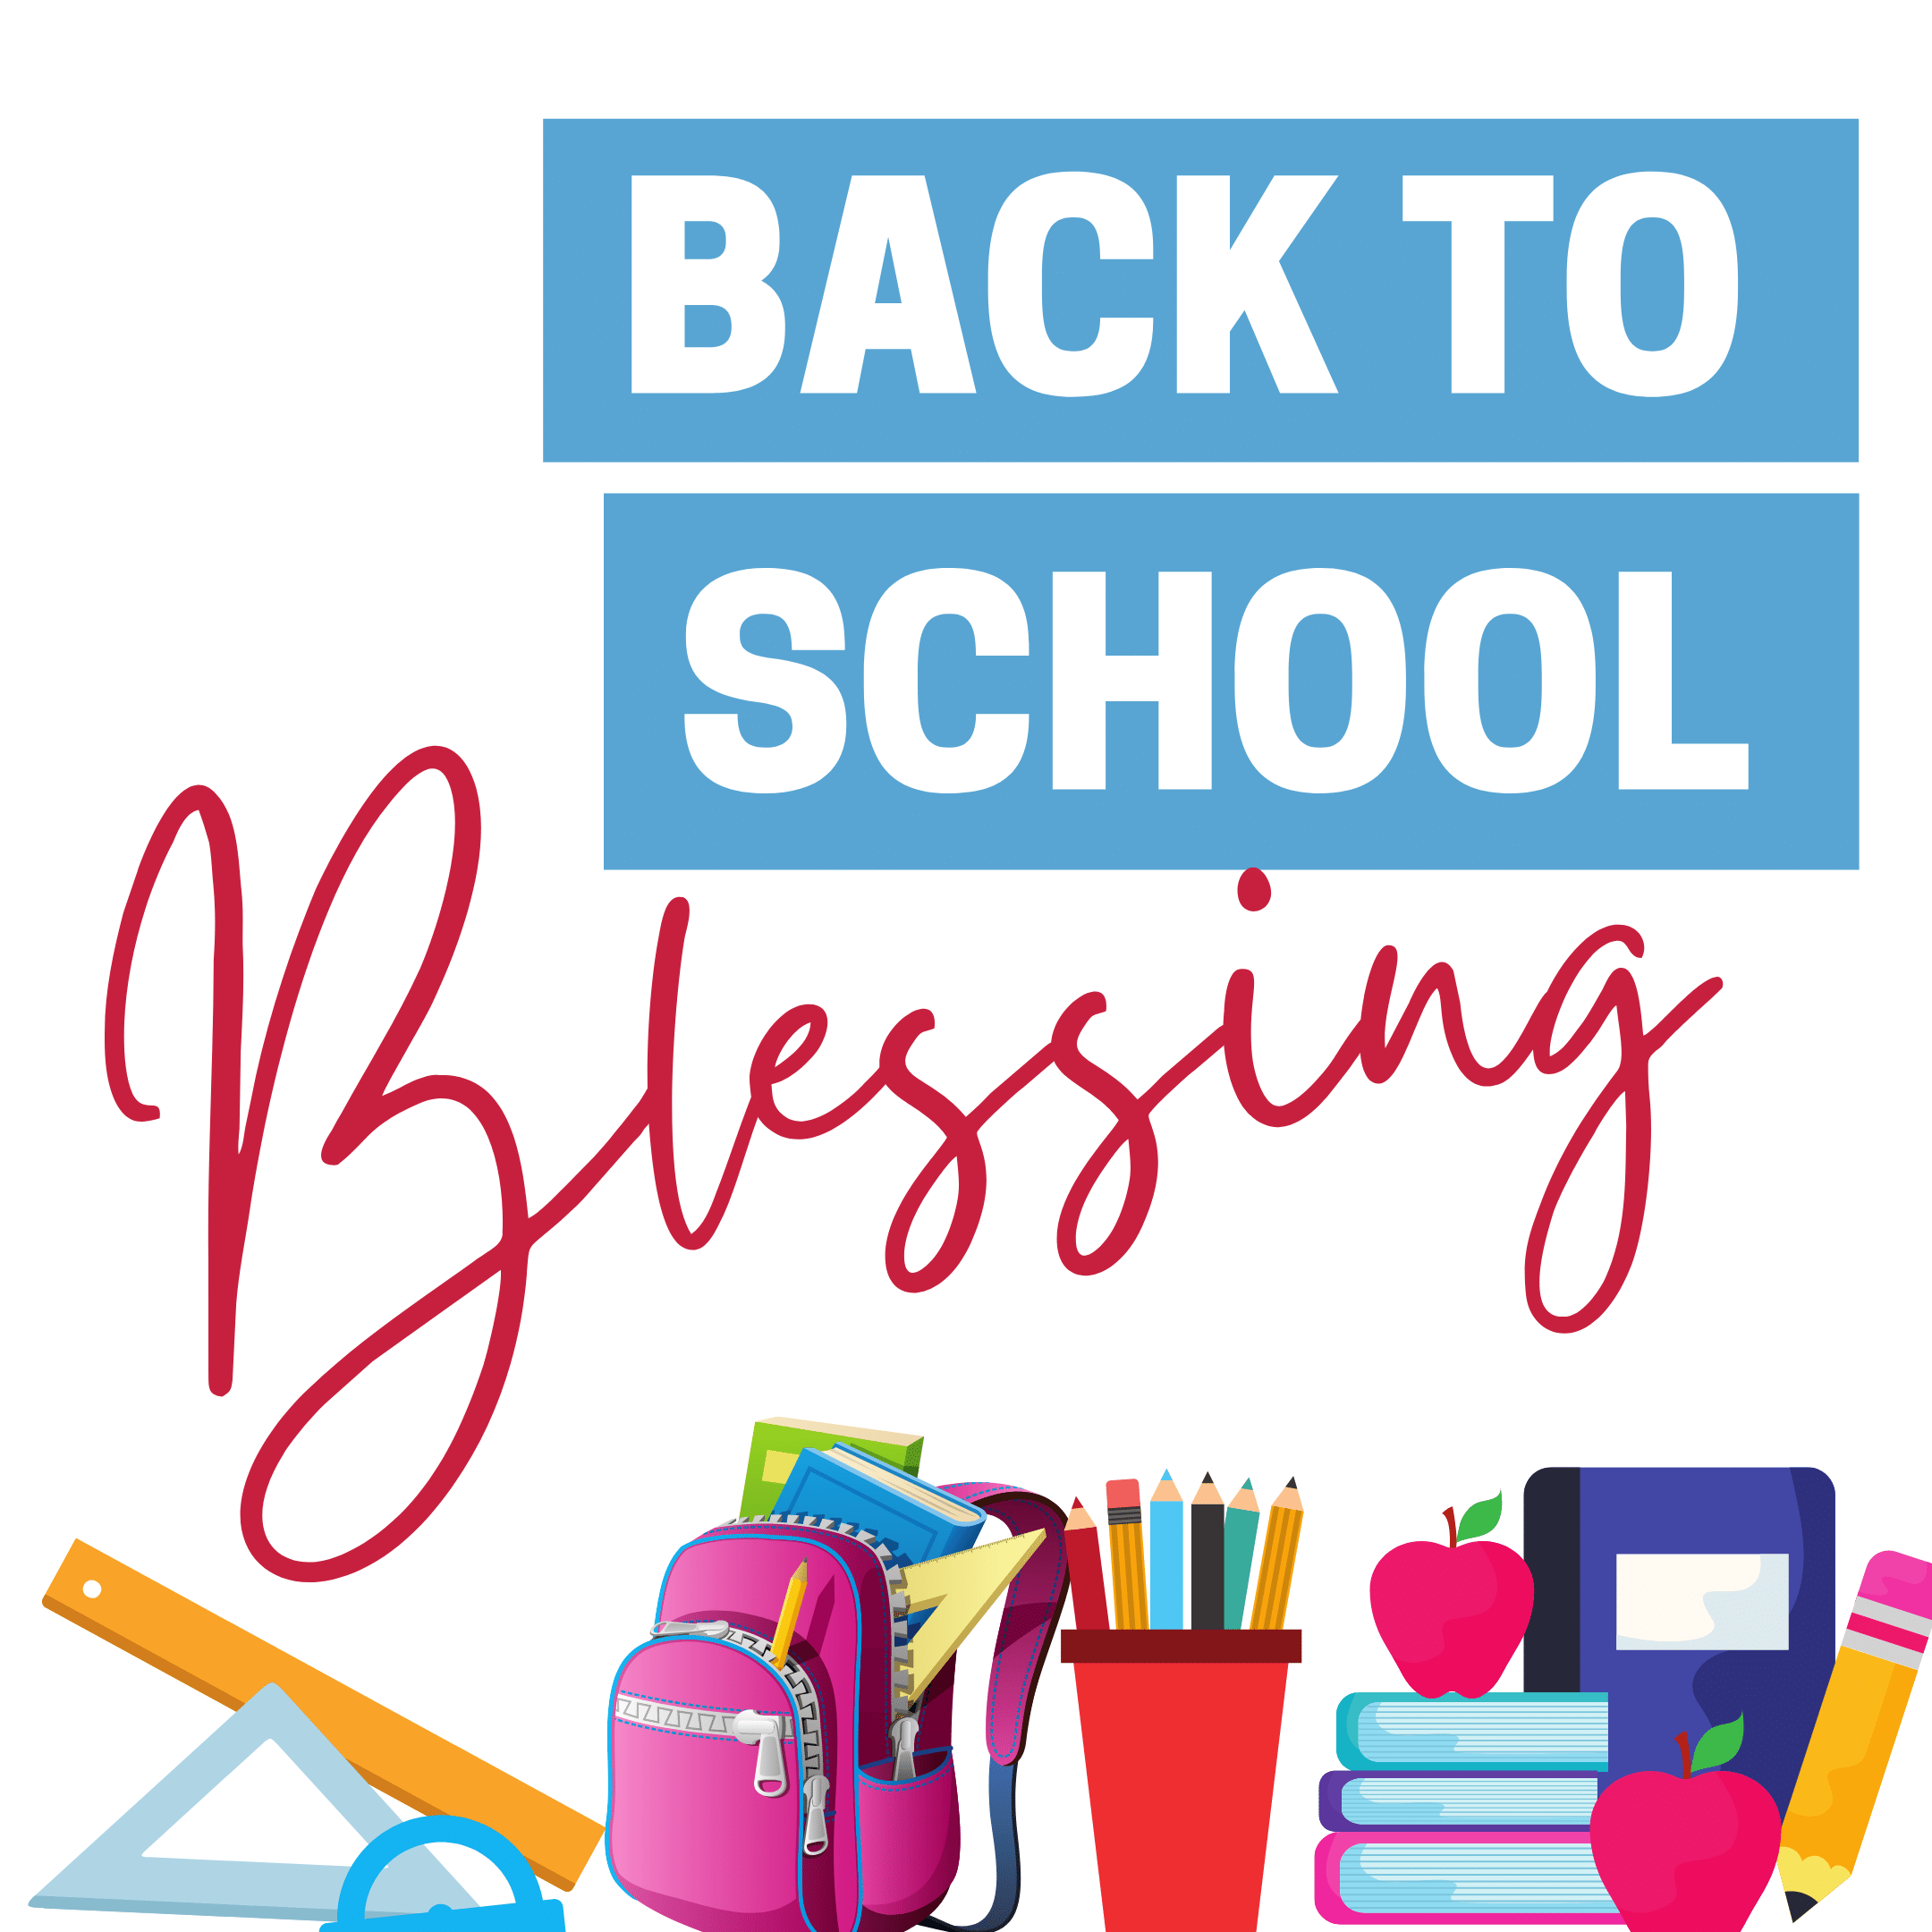 You are currently viewing Back to School Blessing